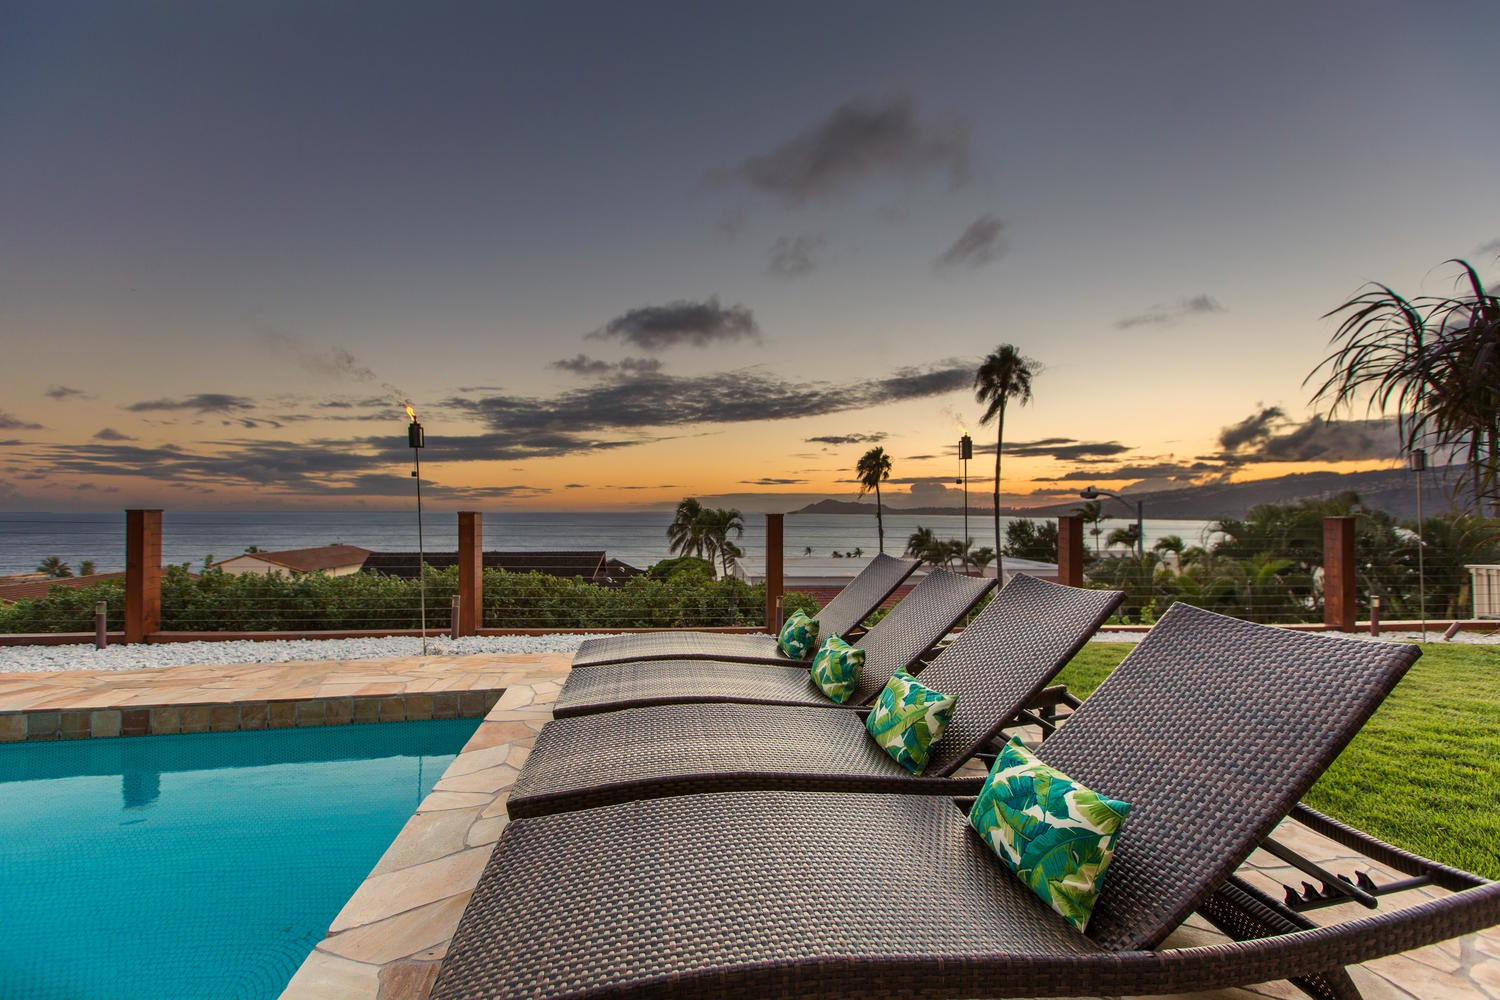 Honolulu Vacation Rentals, Aloha Nalu - Poolside bliss awaits, with chaise lounges ready for your retreat.